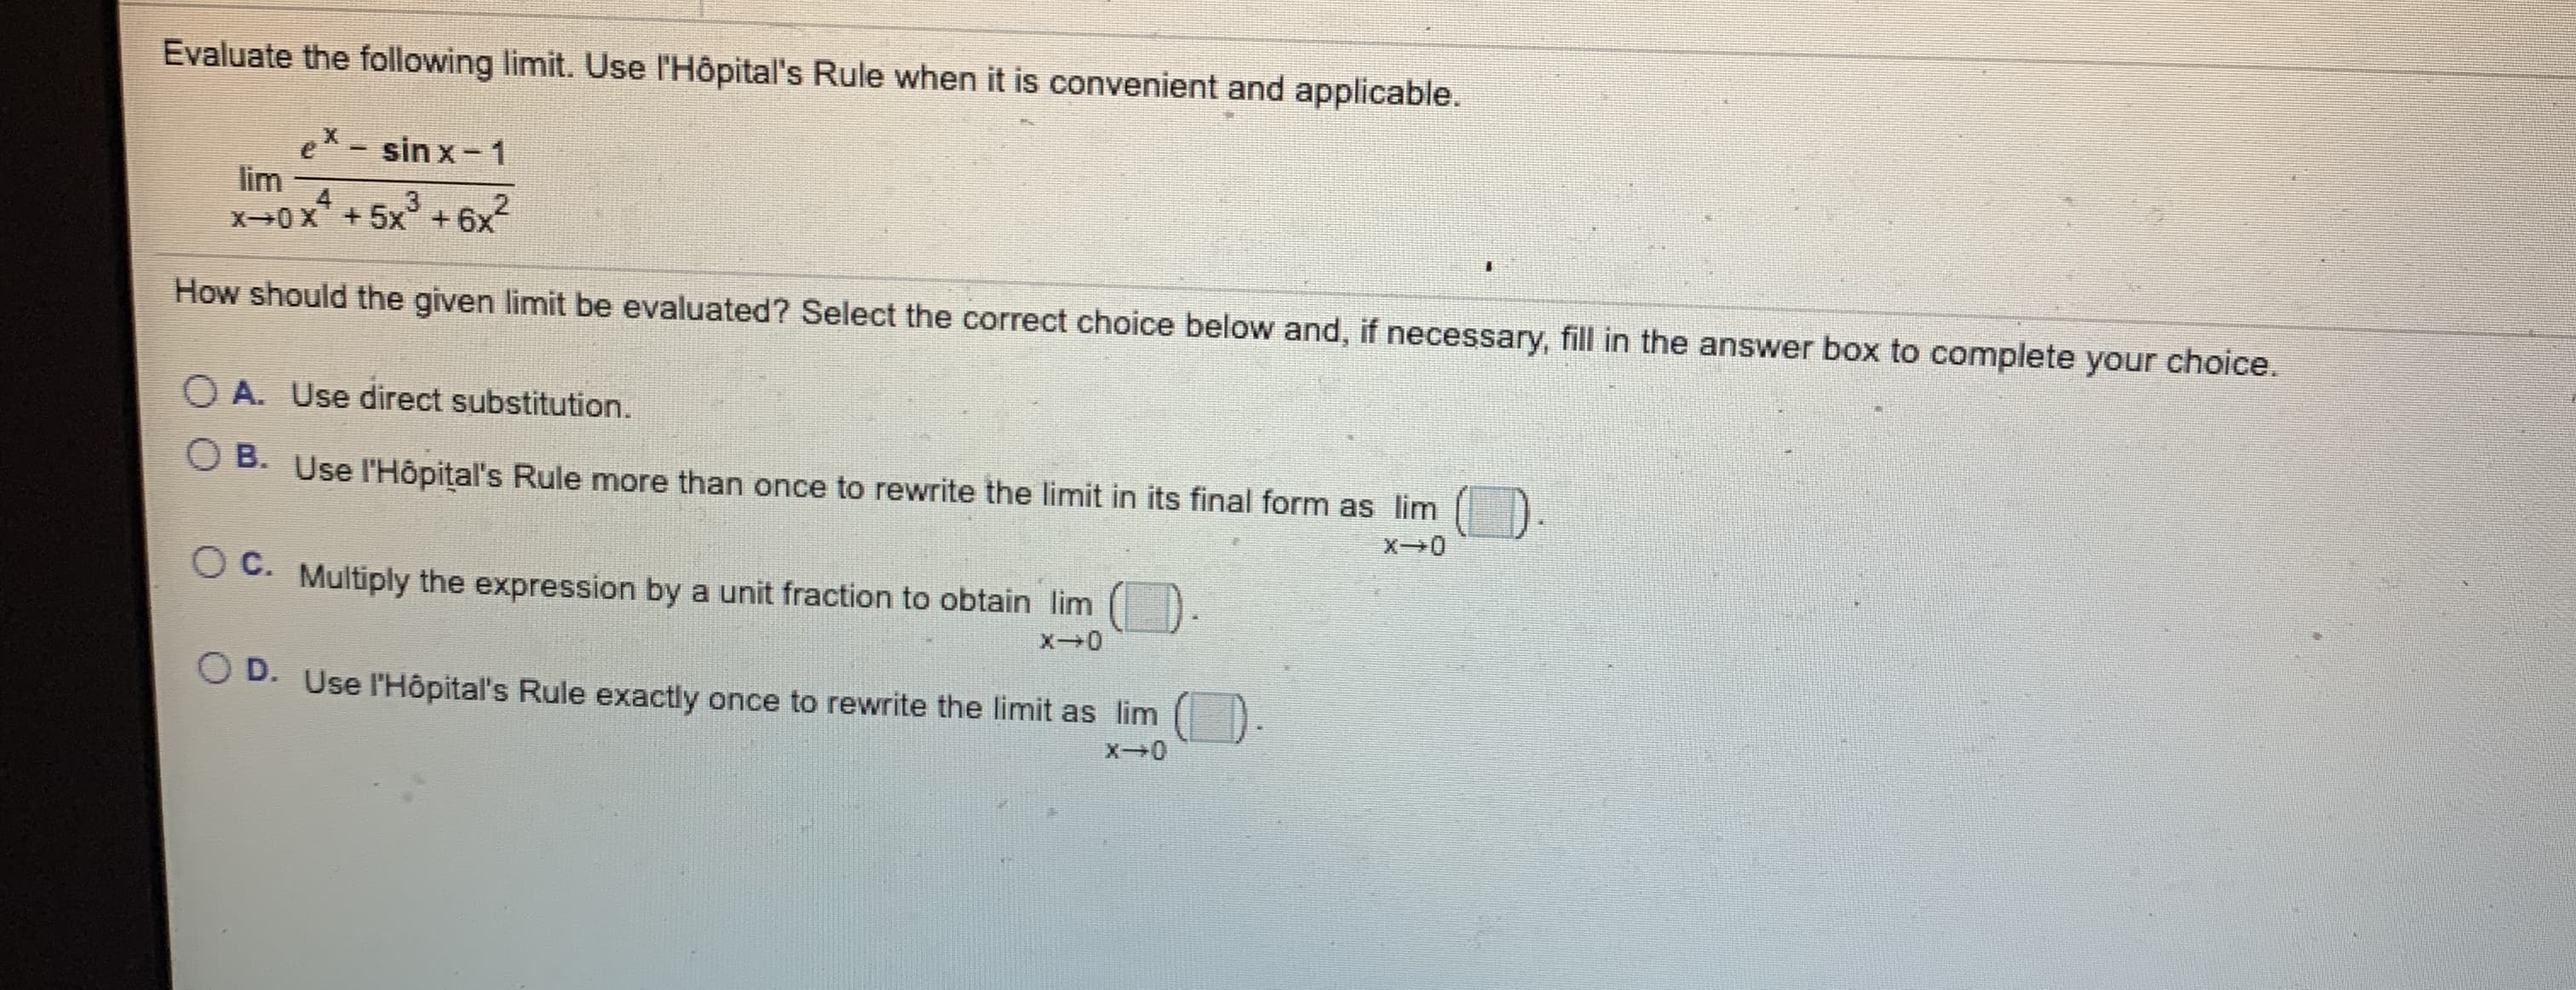 Evaluate the following limit. Use l'Hôpital's Rule when it is convenient and applicable.
ex- sin x- 1
lim
4.
X0X+5x +6x
3
How should the given limit be evaluated? Select the correct choice below and, if necessary, fill in the answer box to complete your choice.
O A. Use direct substitution.
O B. Use l'Hôpital's Rule more than once to rewrite the limit in its final form as lim
O C. Multiply the expression by a unit fraction to obtain lim
O D. Use l'Hôpital's Rule exactly once to rewrite the limit as lim
X0
